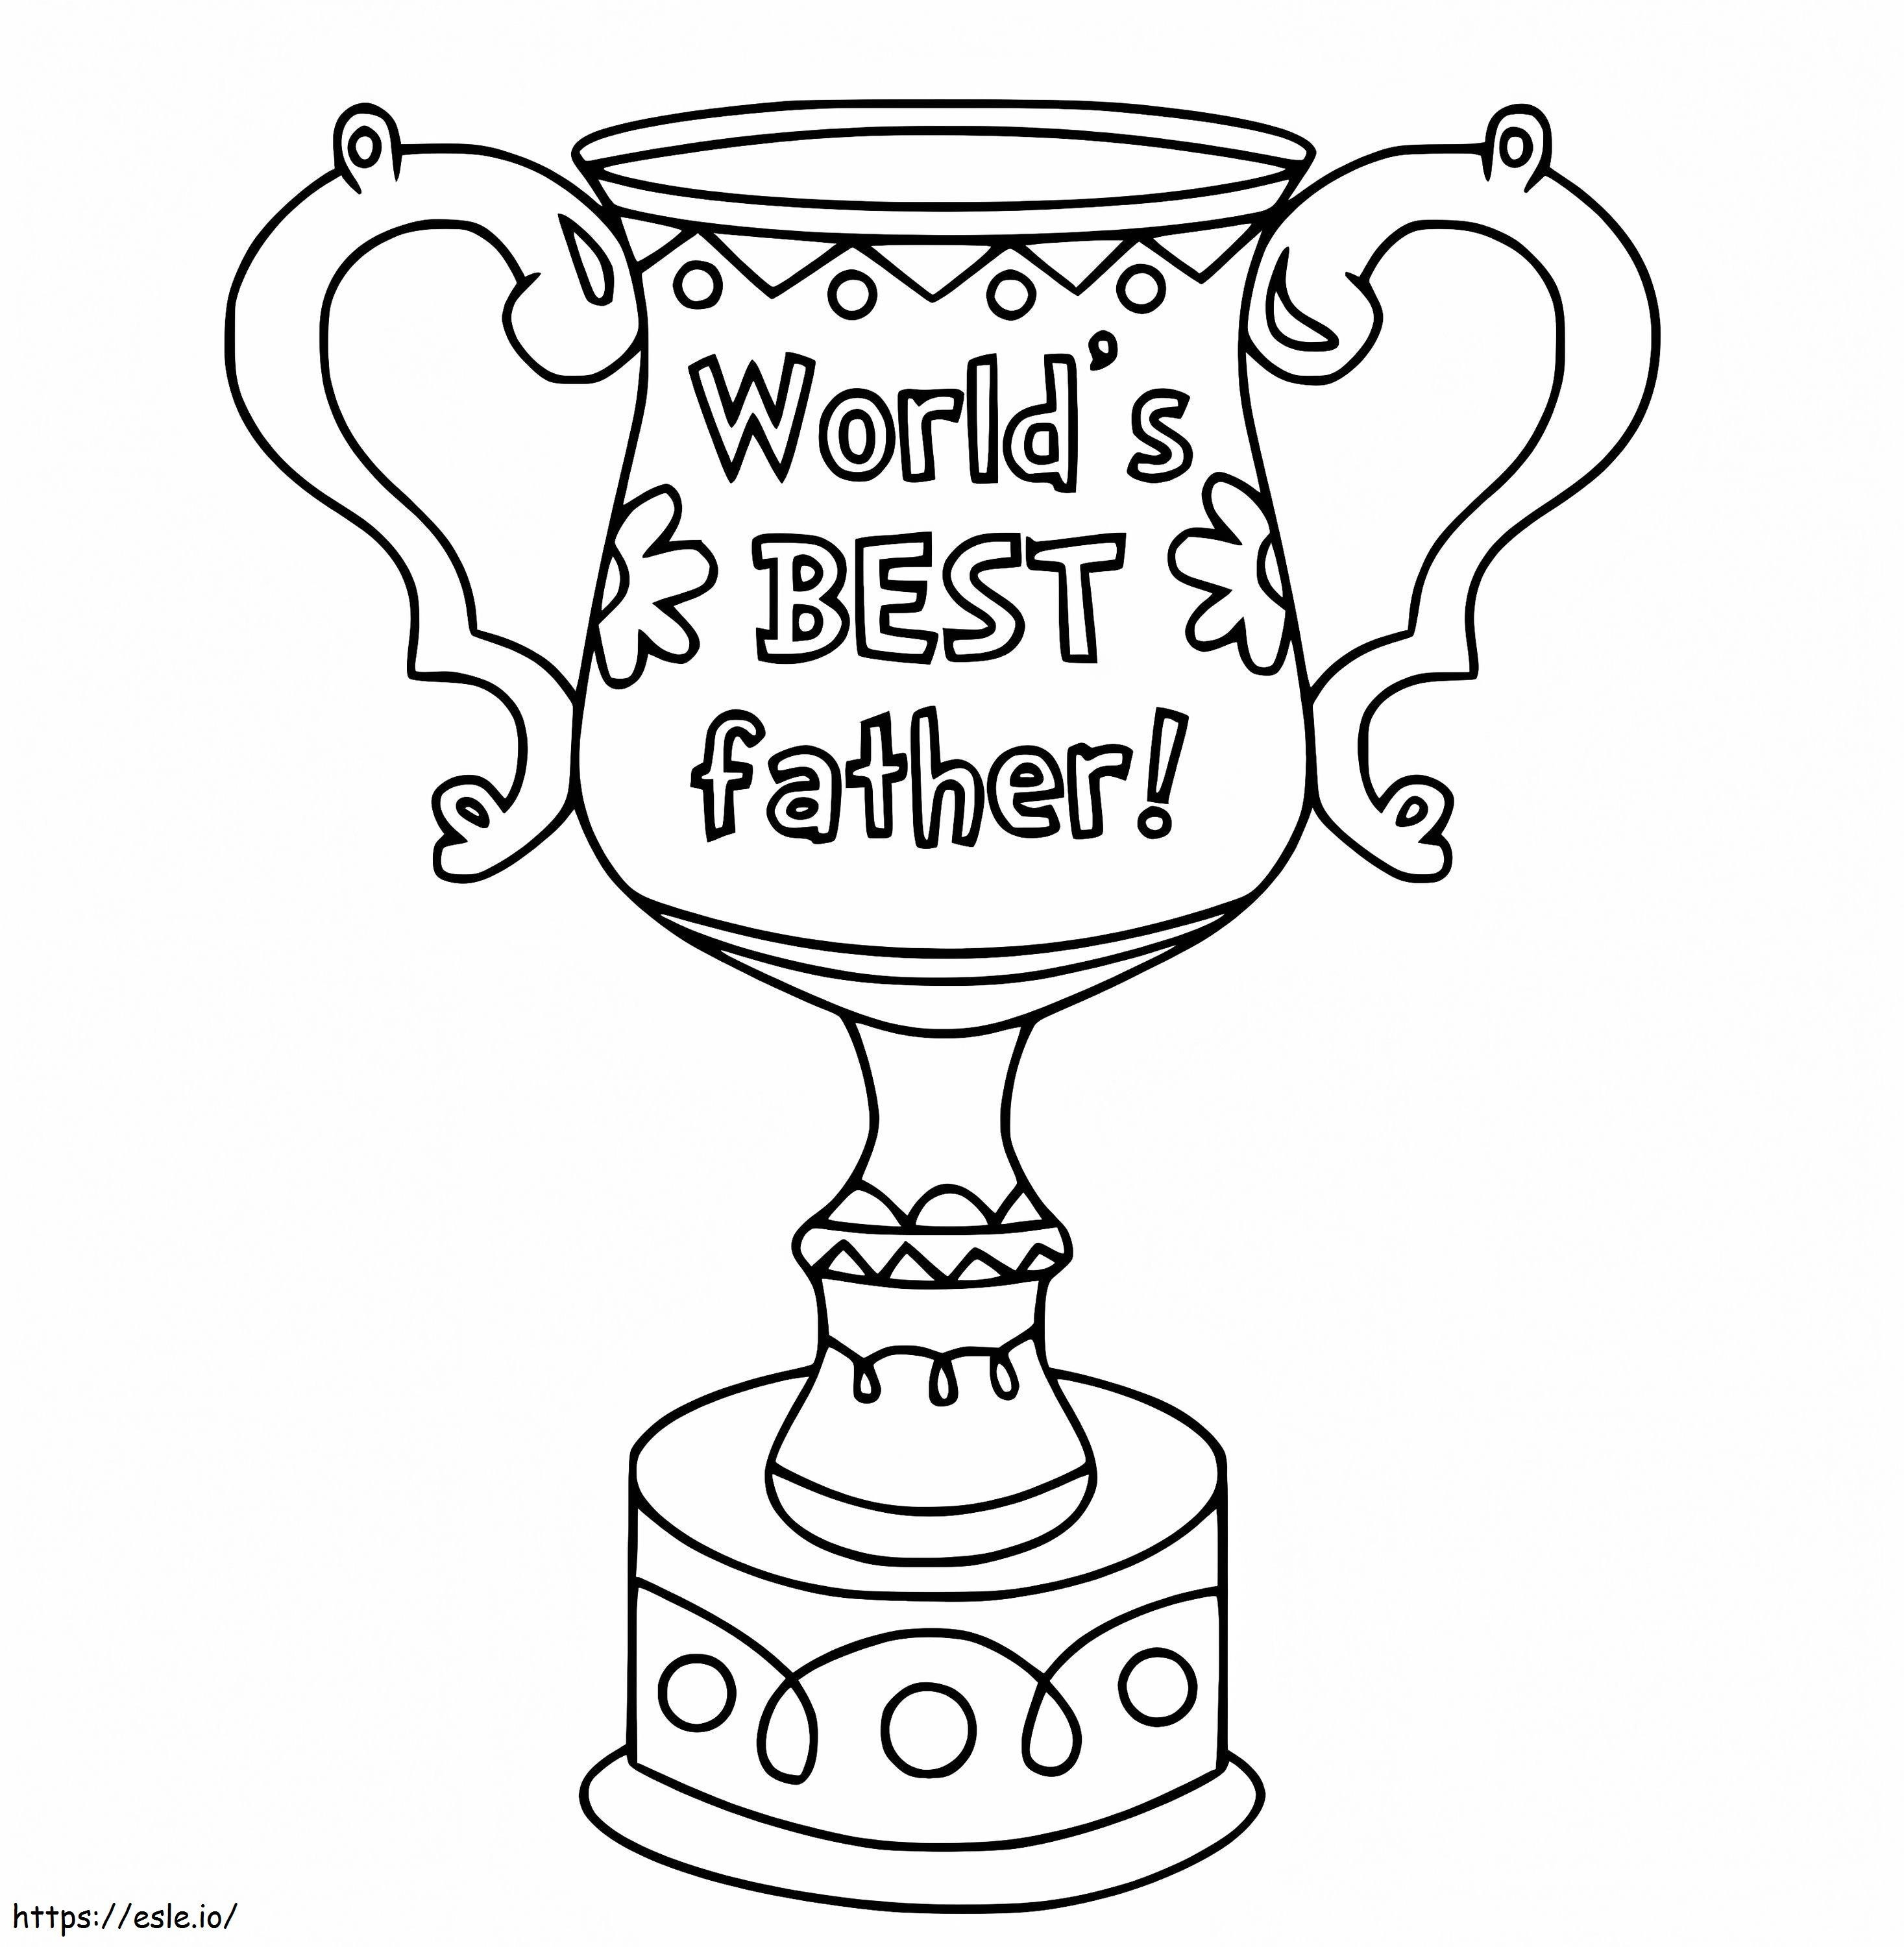 Worlds The Best Father coloring page